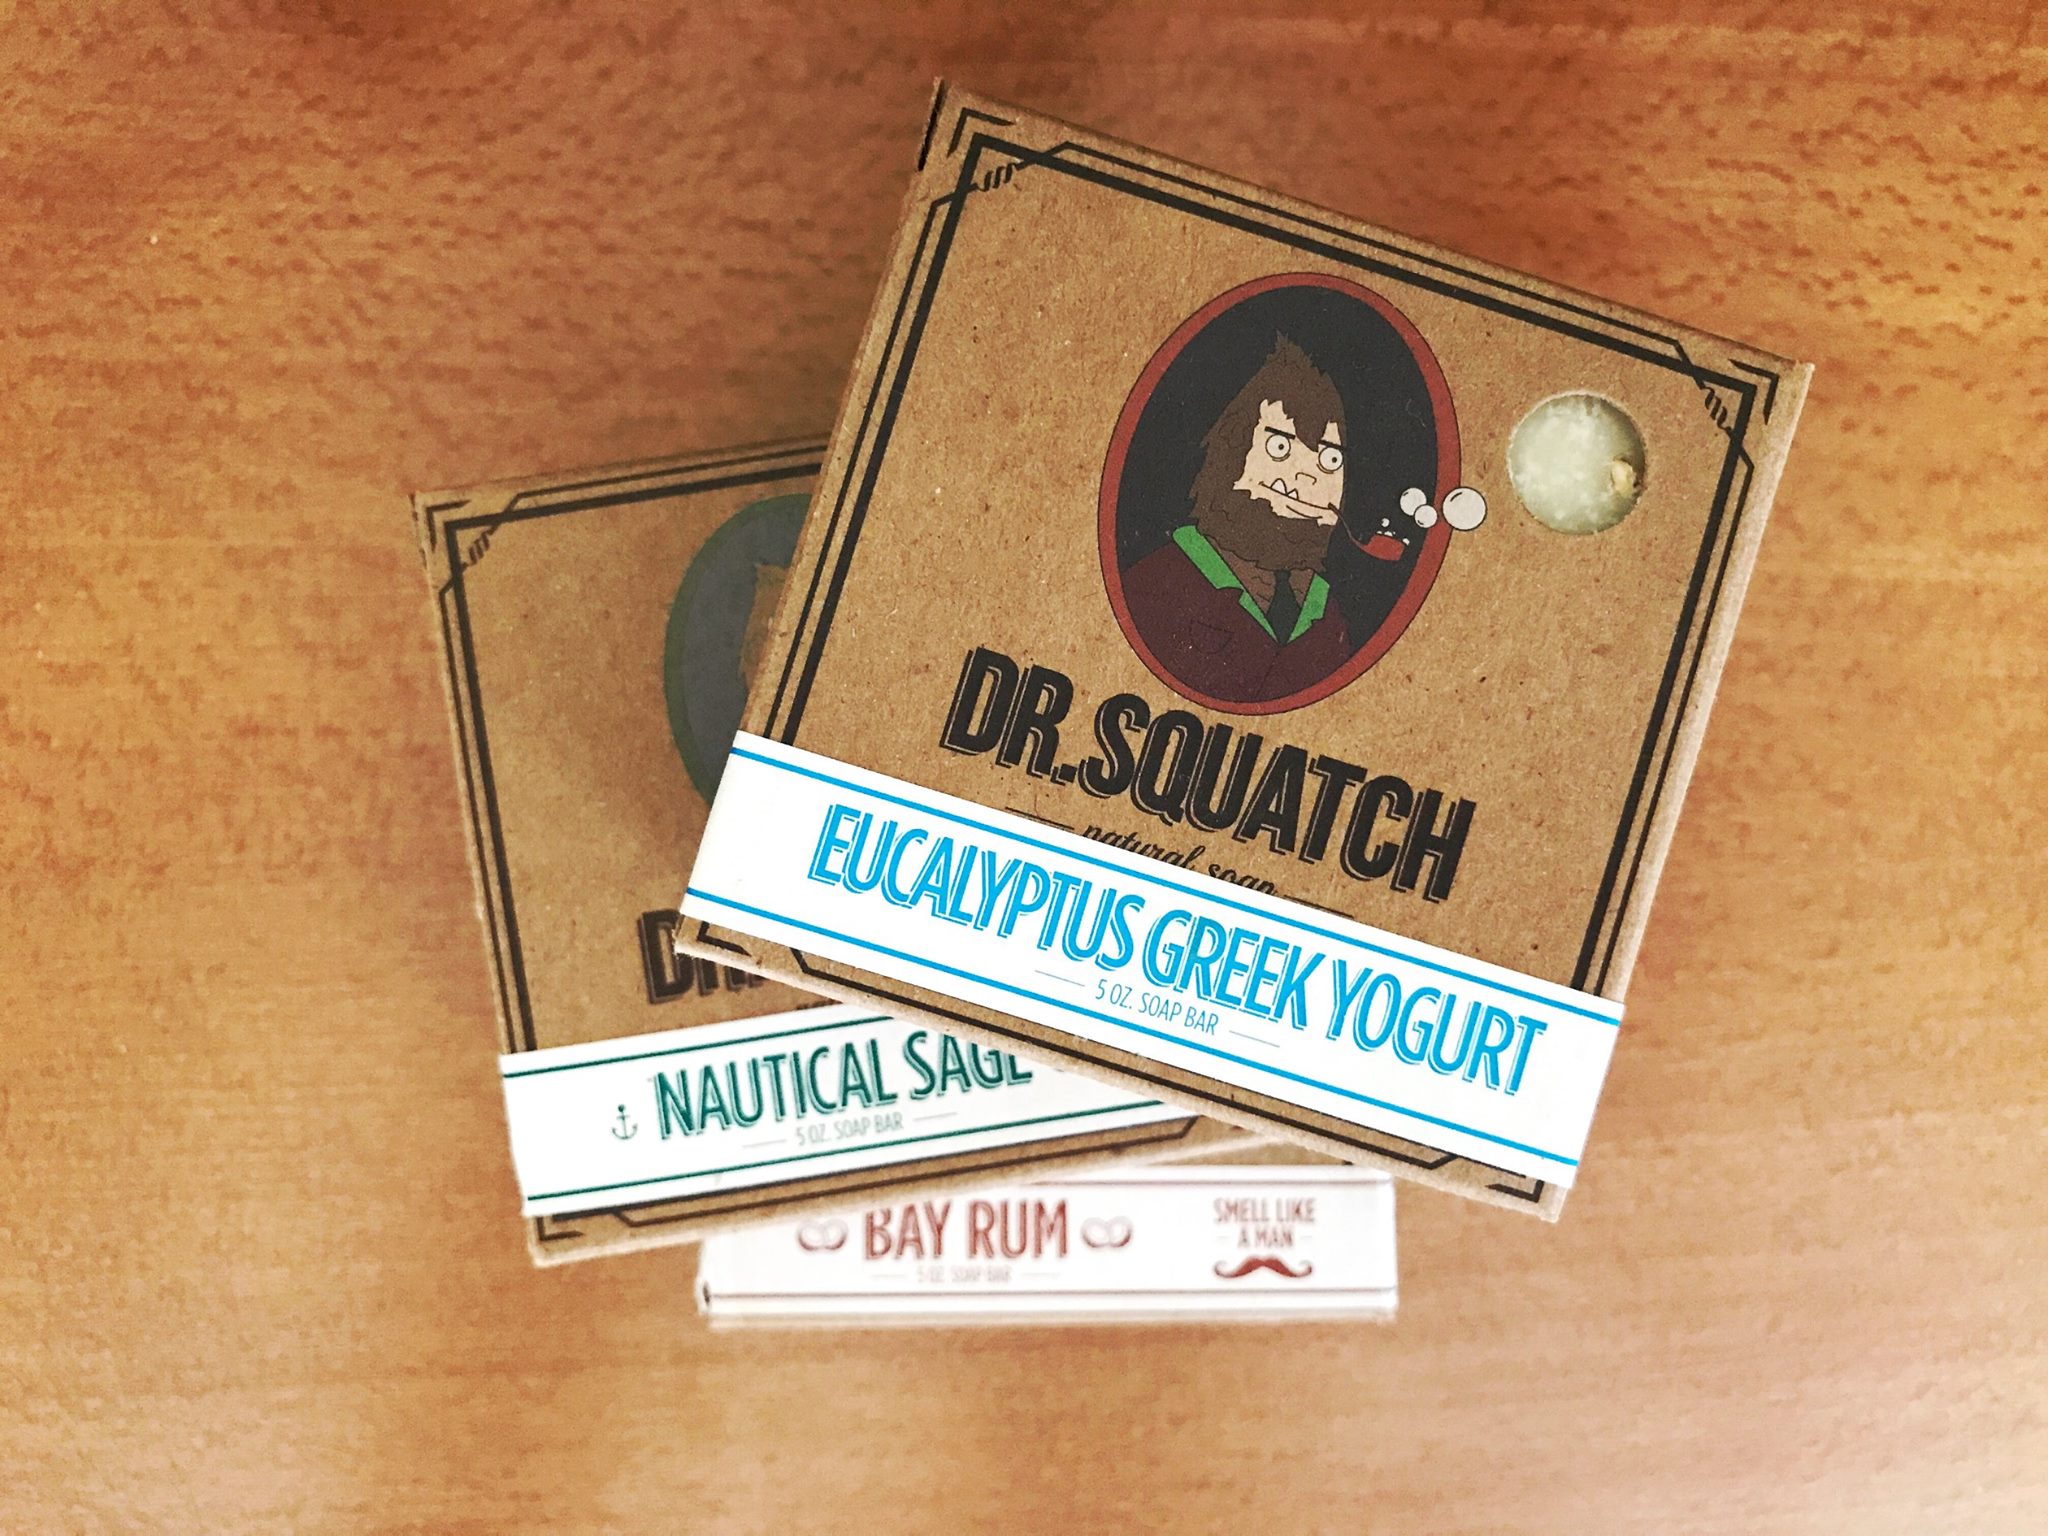 Step Up Your Shower Game with Dr. Squatch Soap Co.